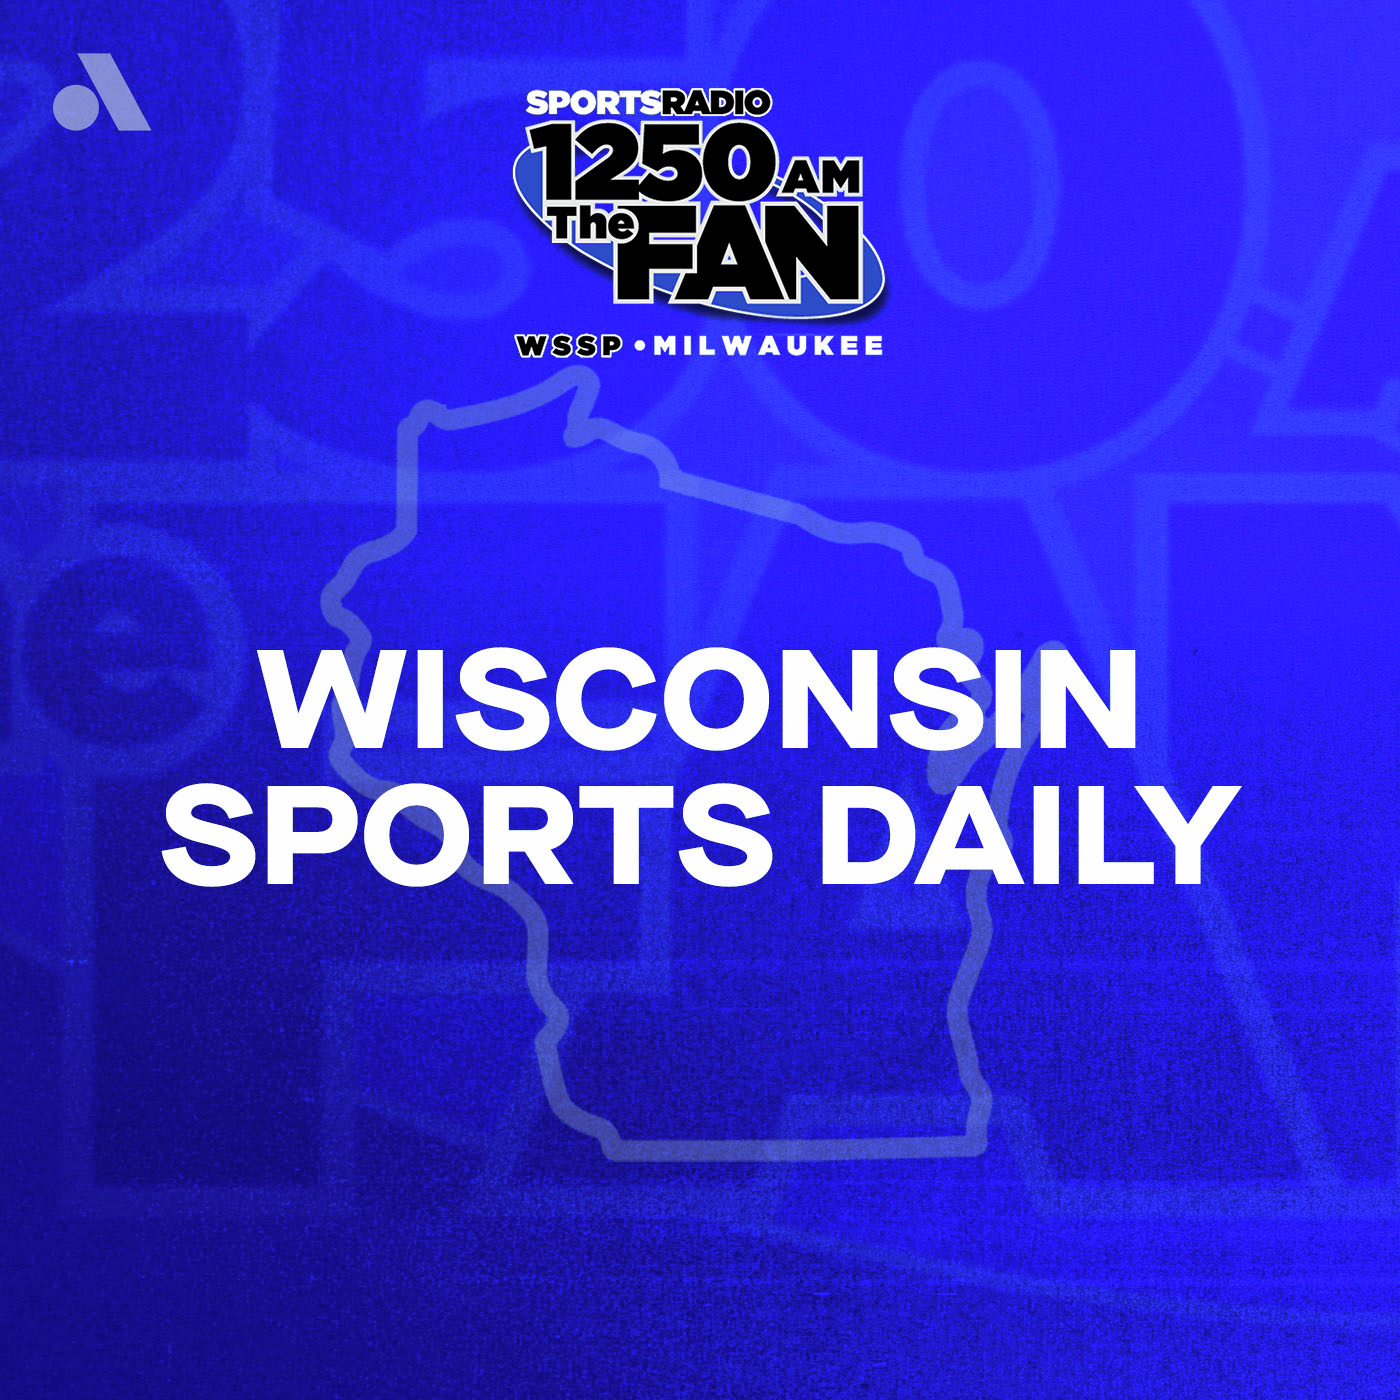 Thursday, May 30th:  Talk About the Crew! Mark Simon Joins Wisconsin Sports Daily